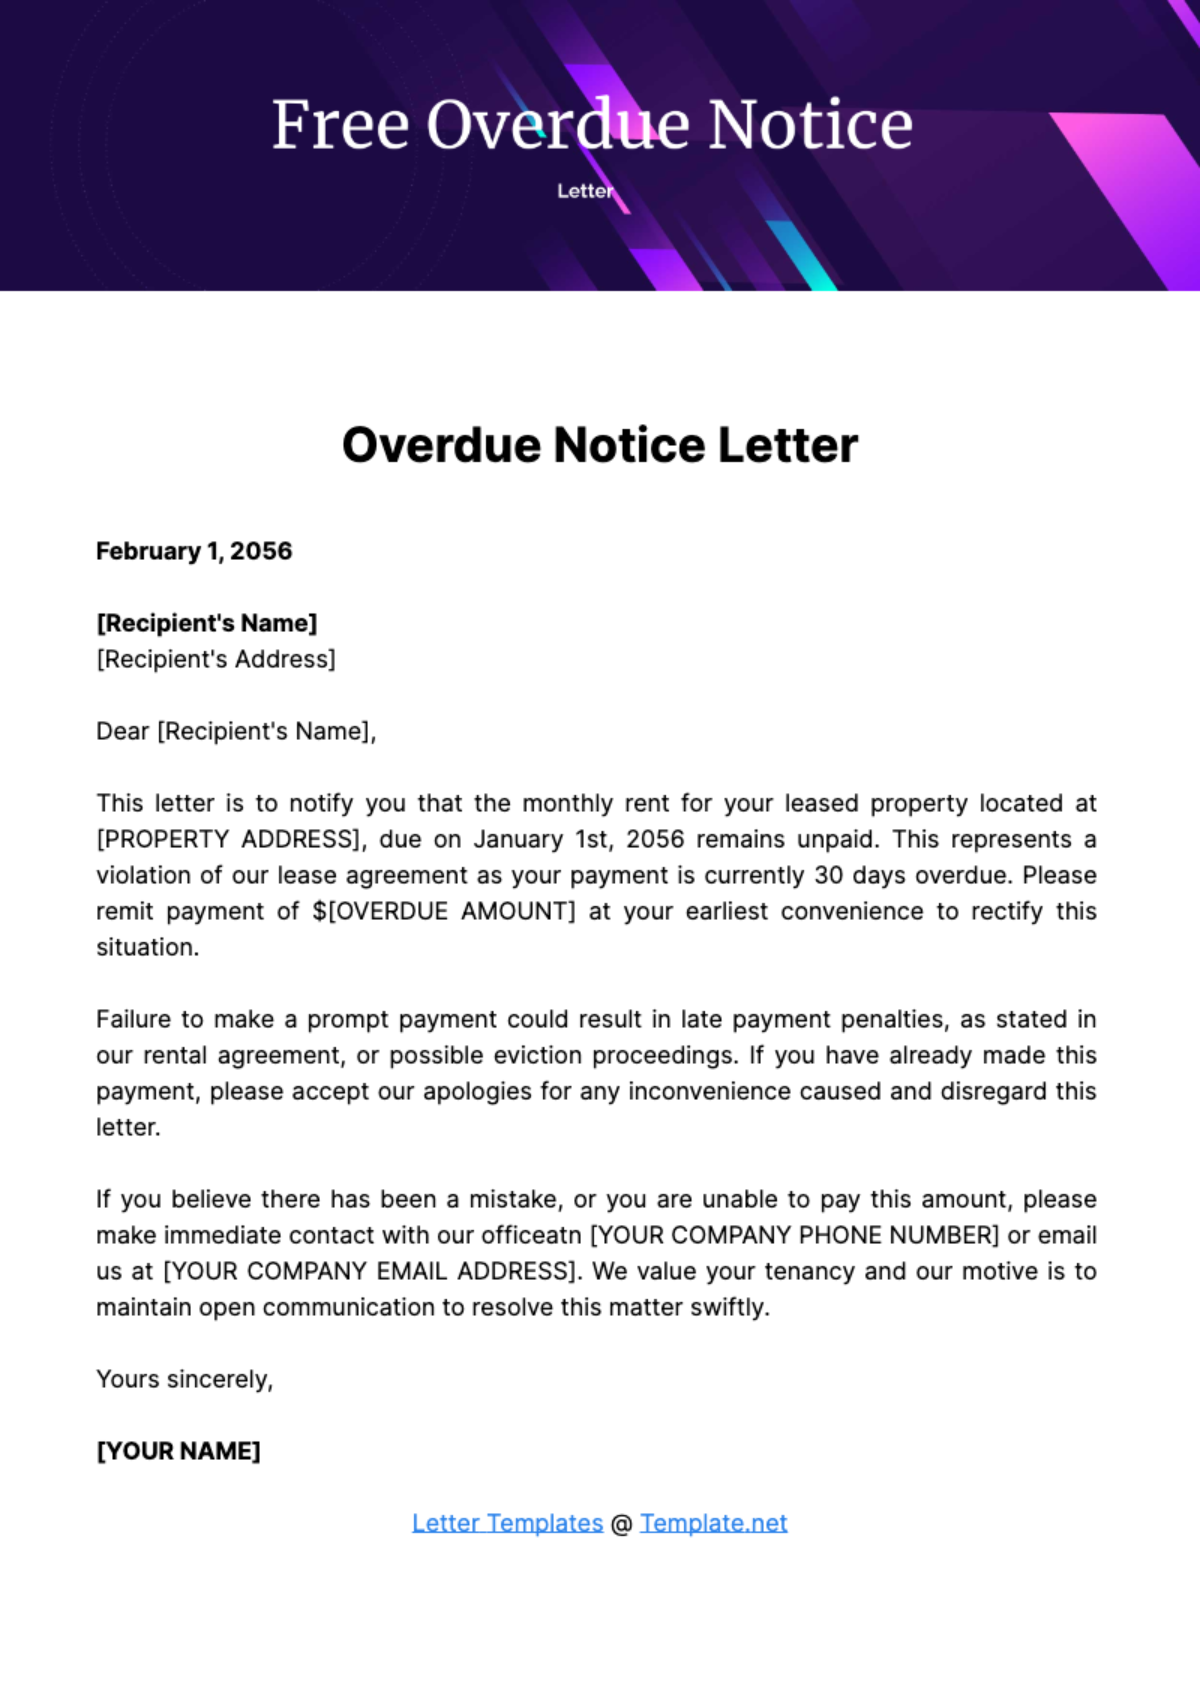 Free Overdue Notice Letter Template